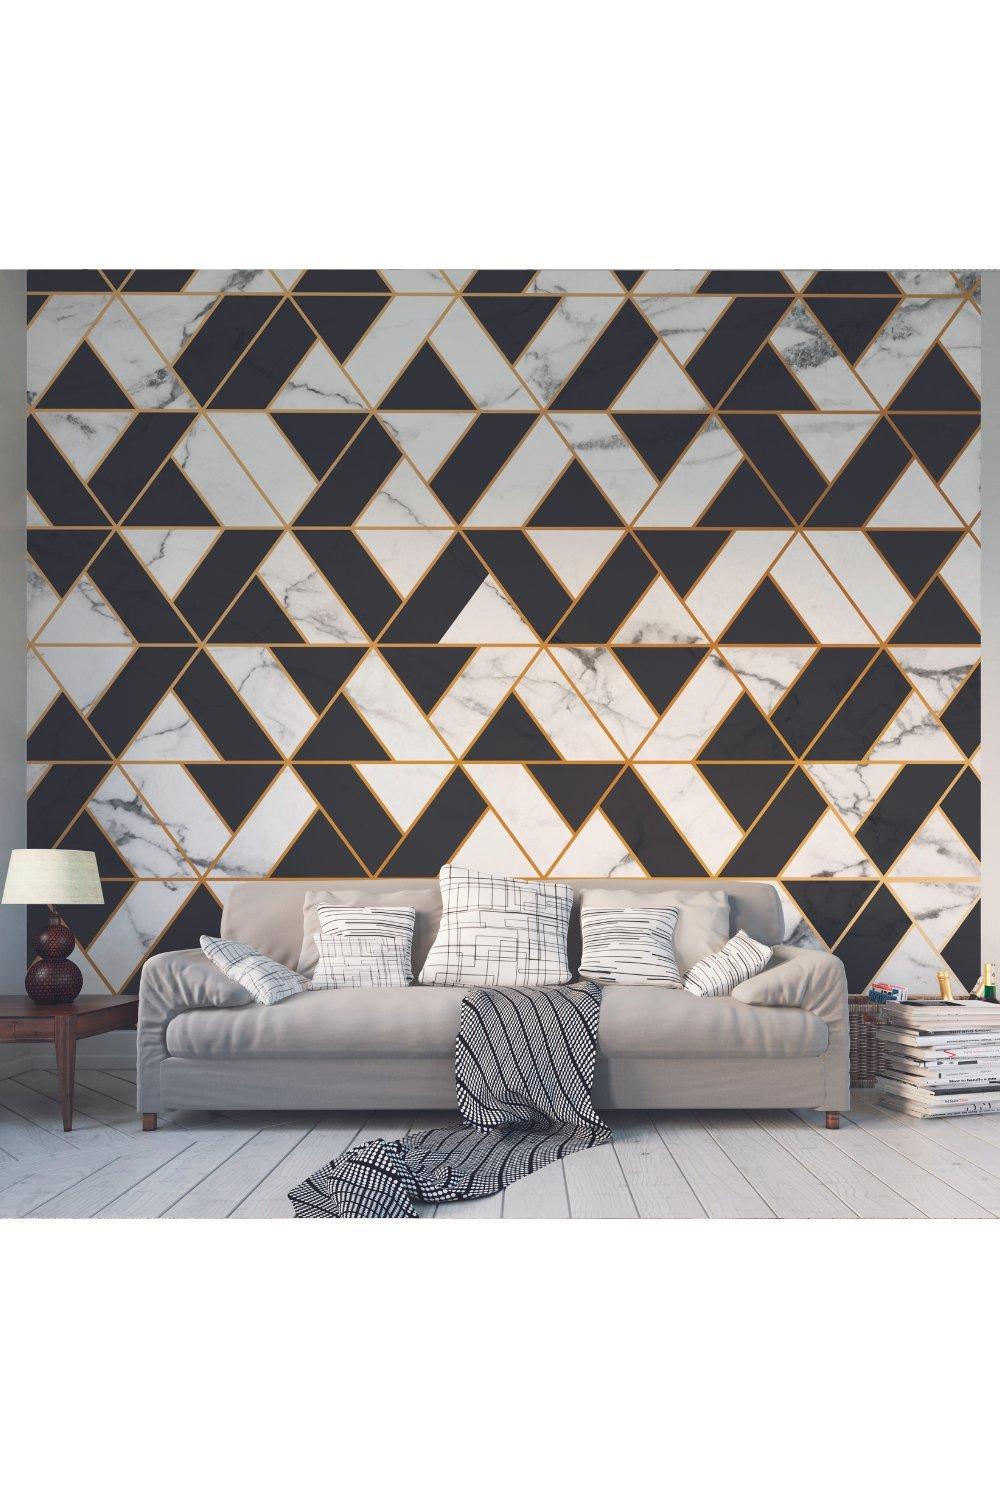 Marbled Textured Geometric White Matt Smooth Paste the Wall Mural 300cm wide x 240cm high